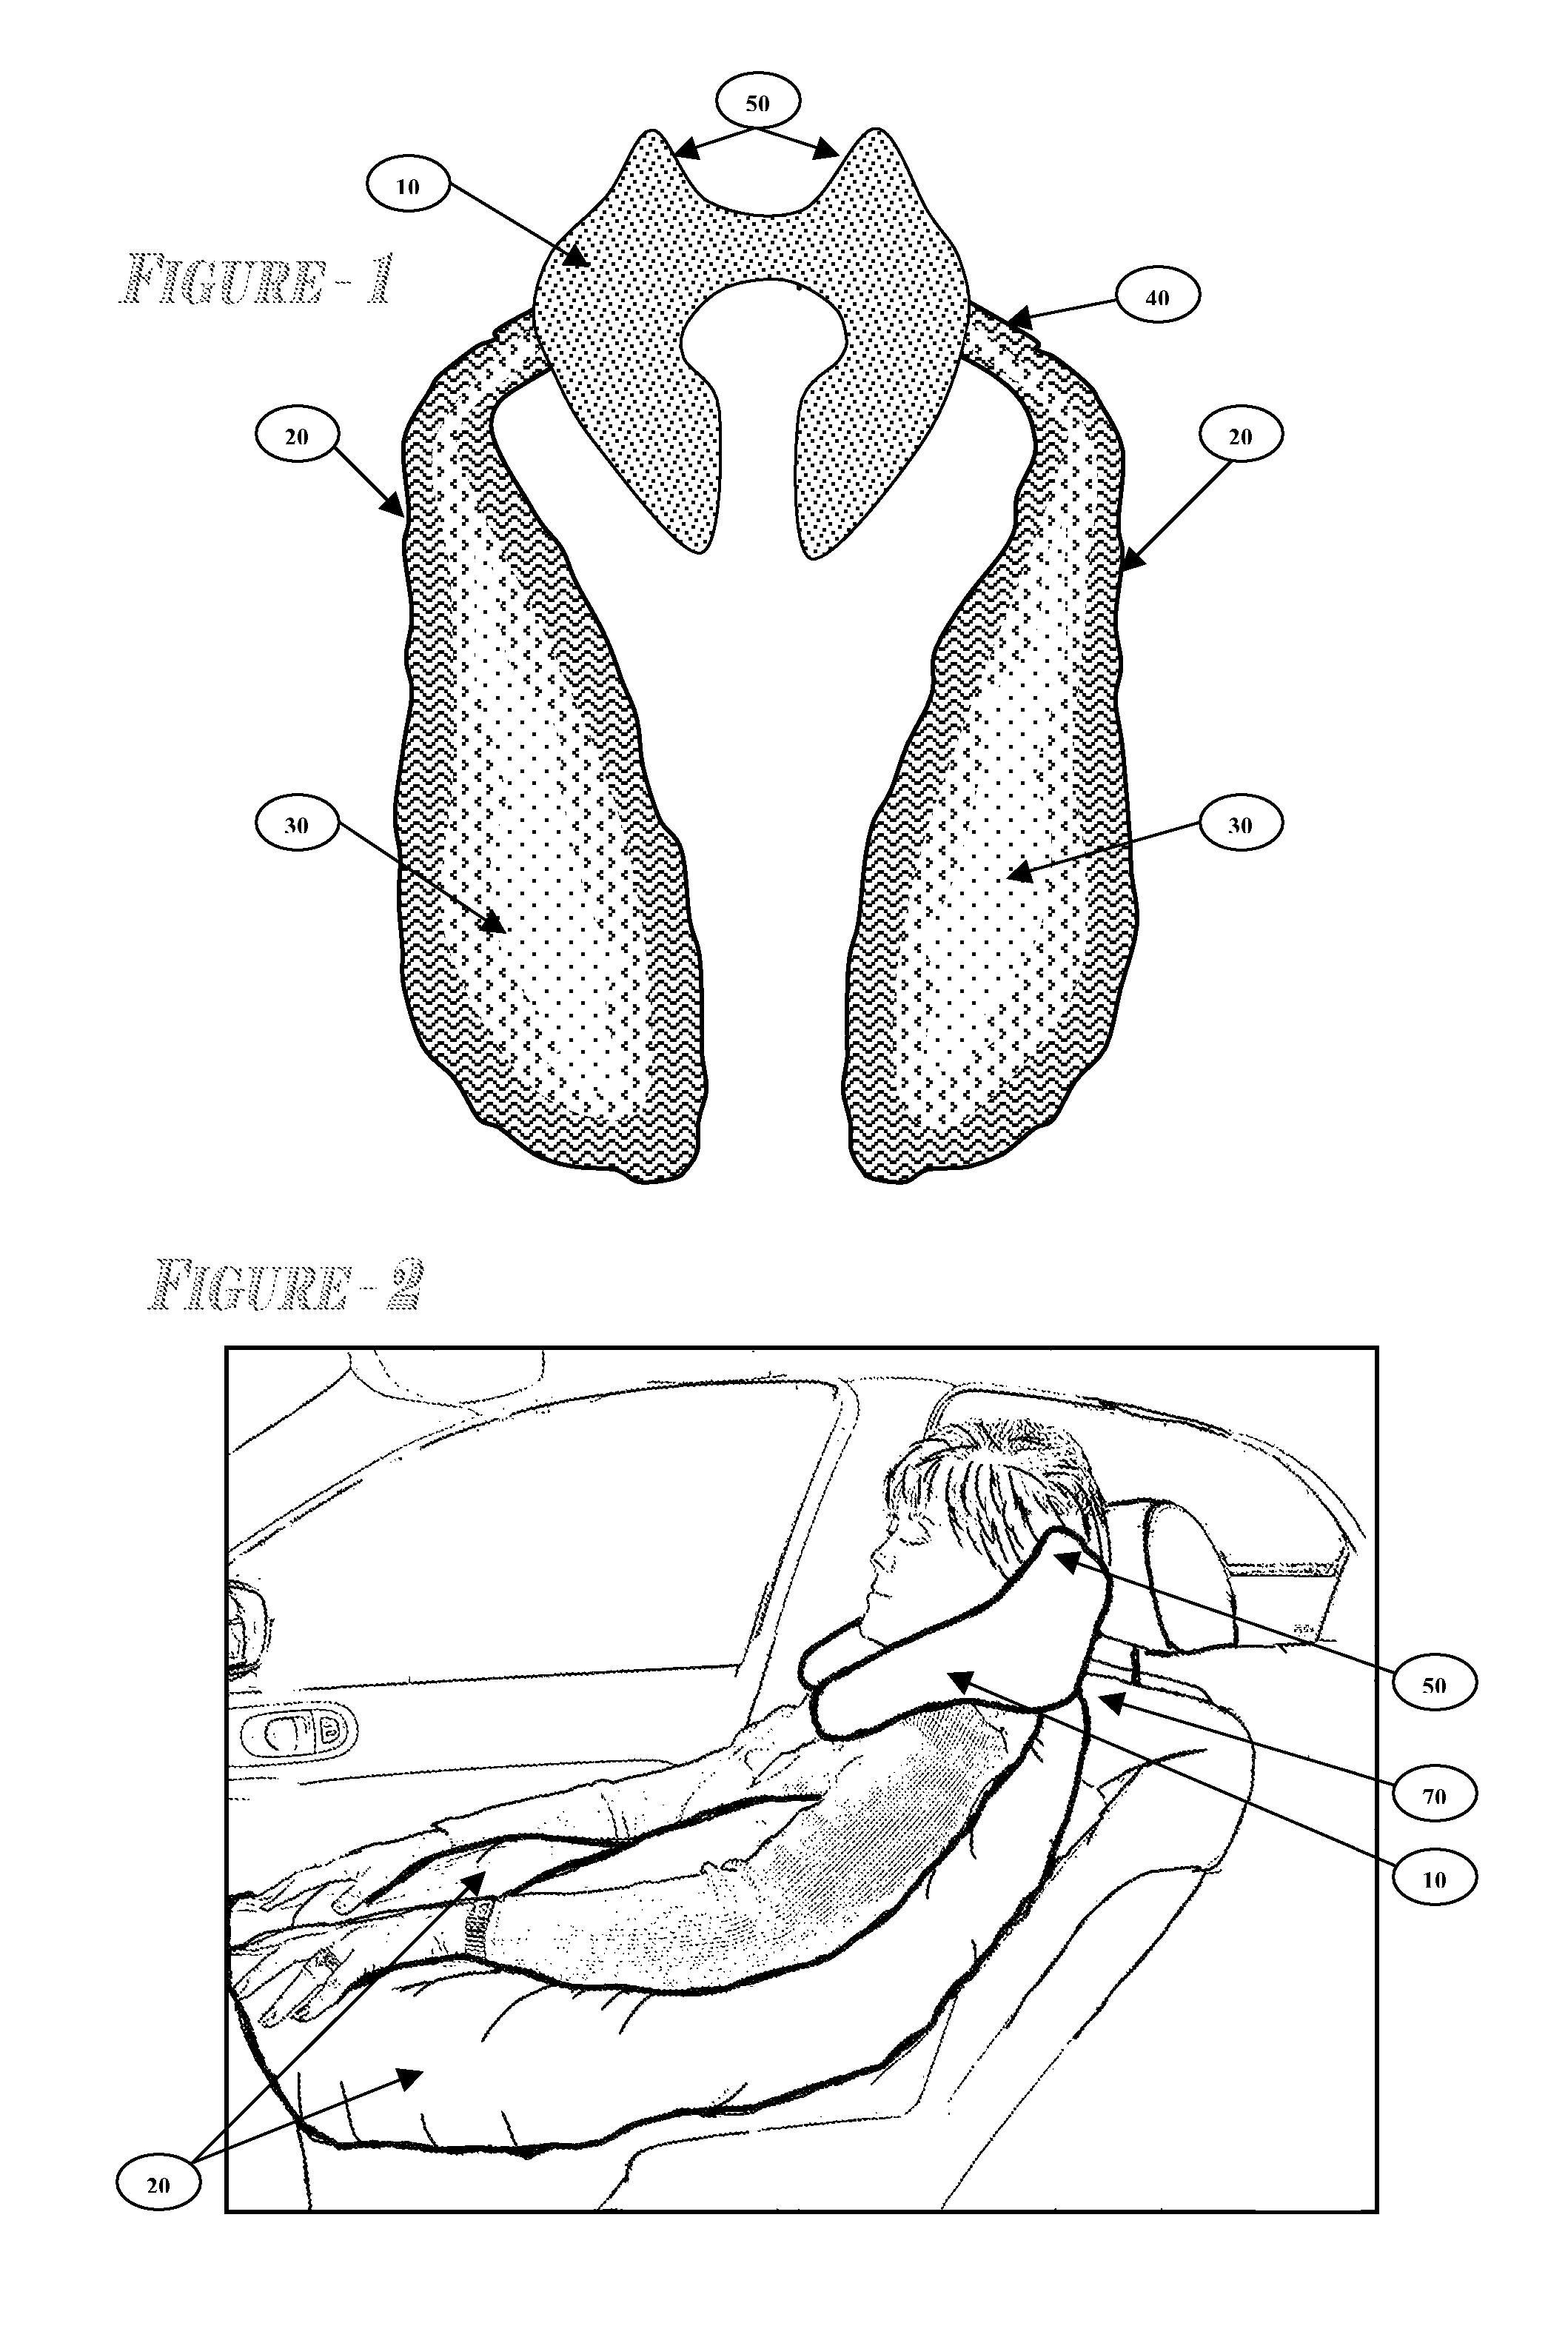 Body support device for sleeping in a seated position